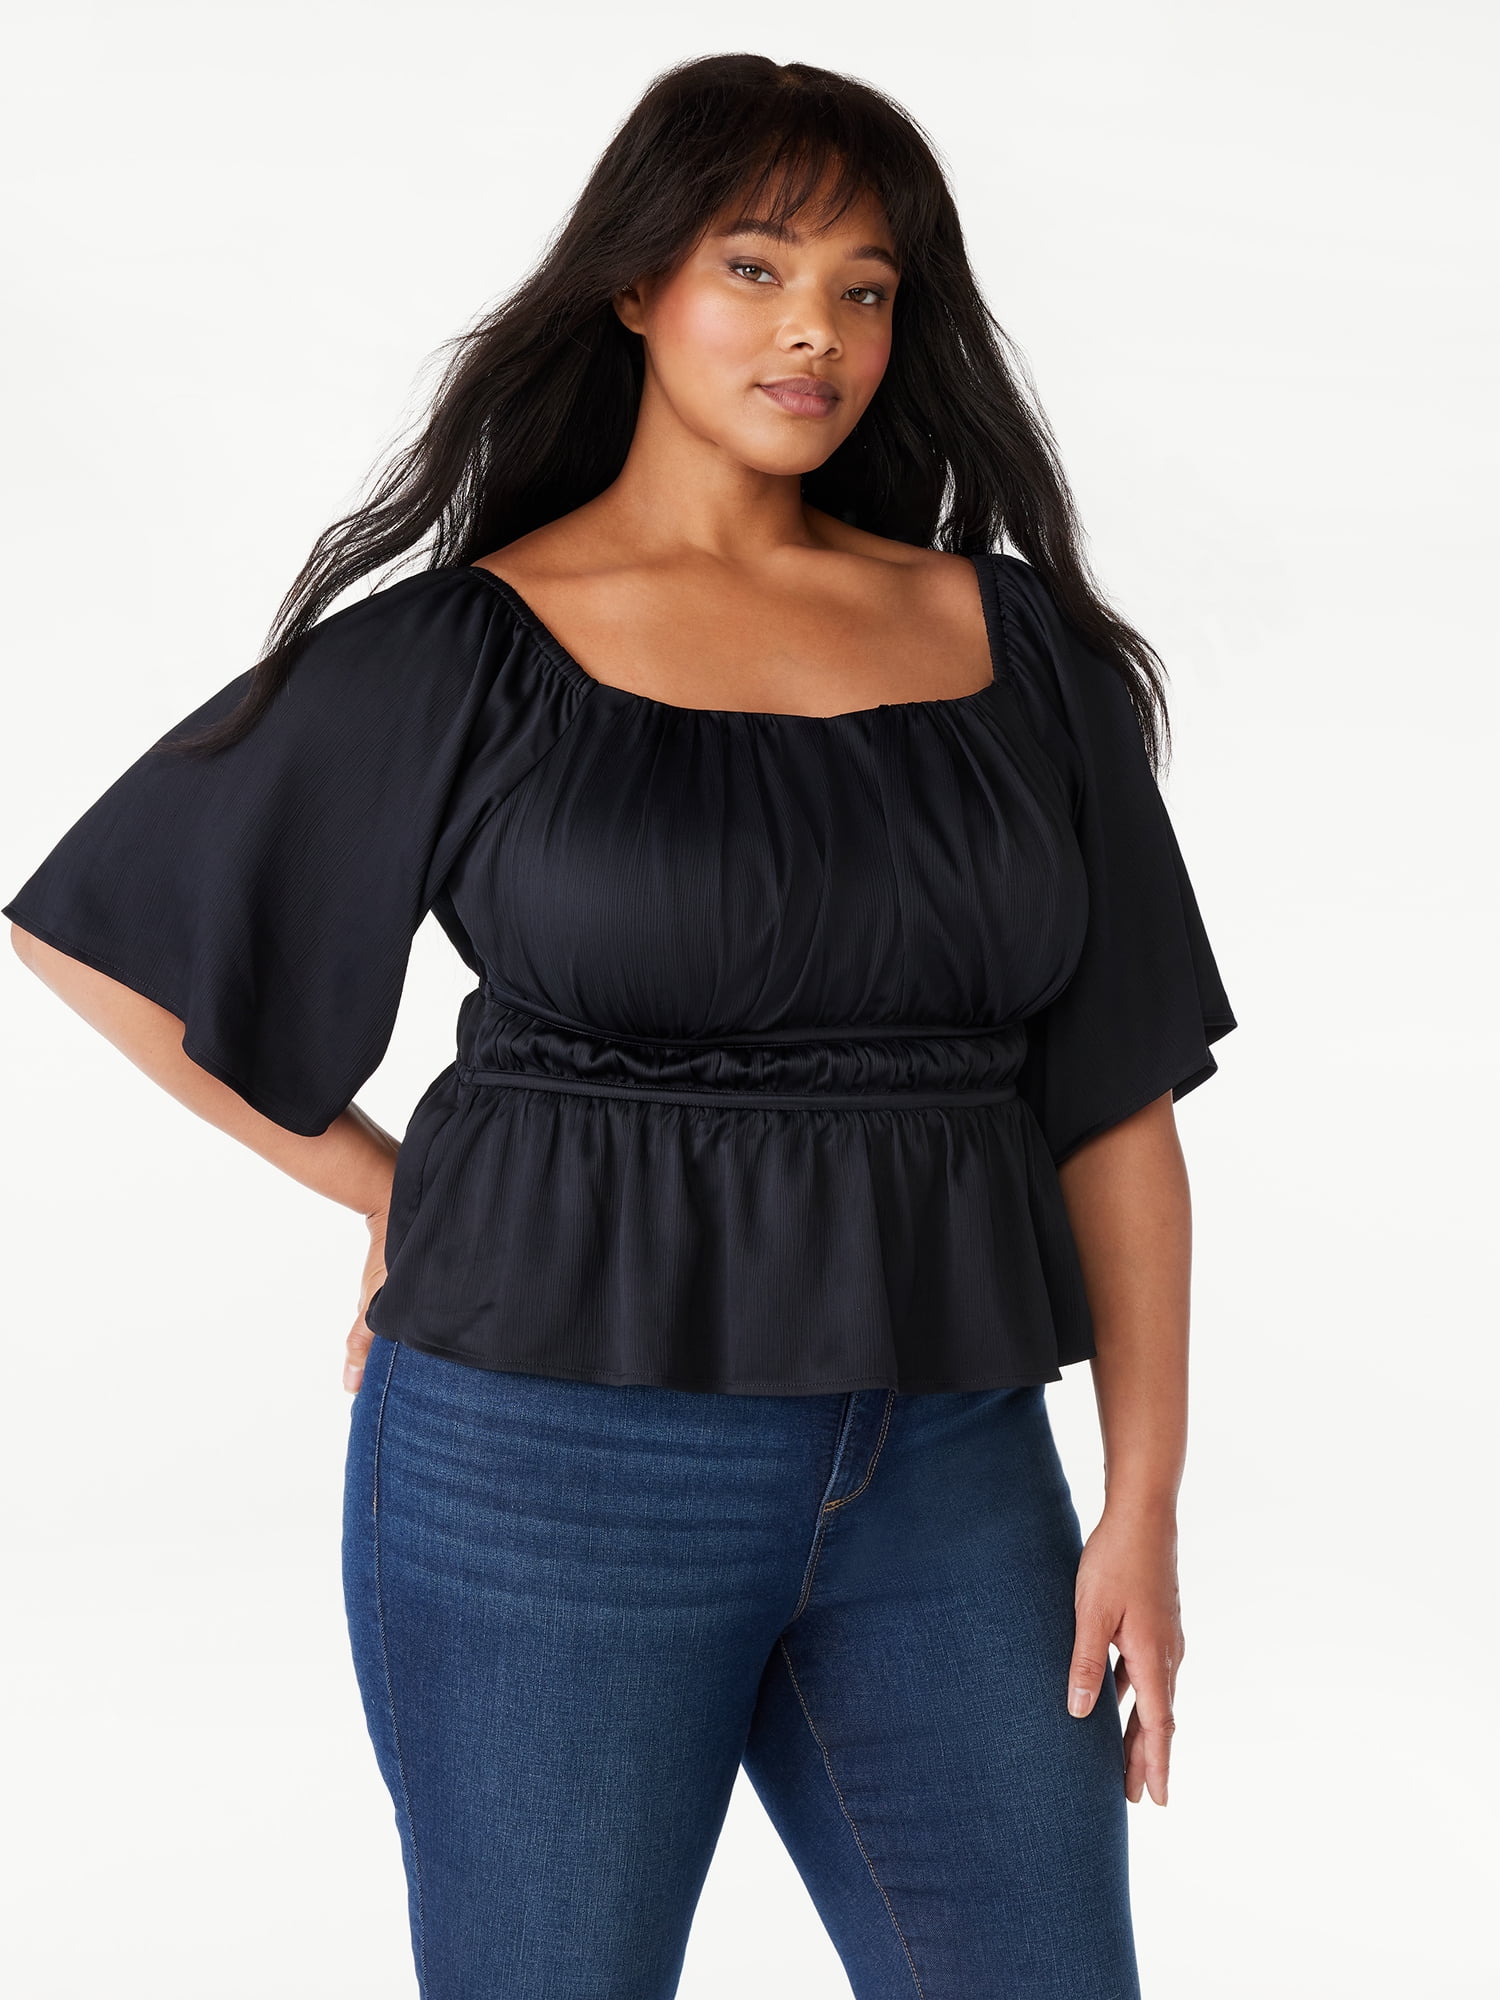 Sofia Jeans Women's Plus Size Peplum Top with Bell Sleeves